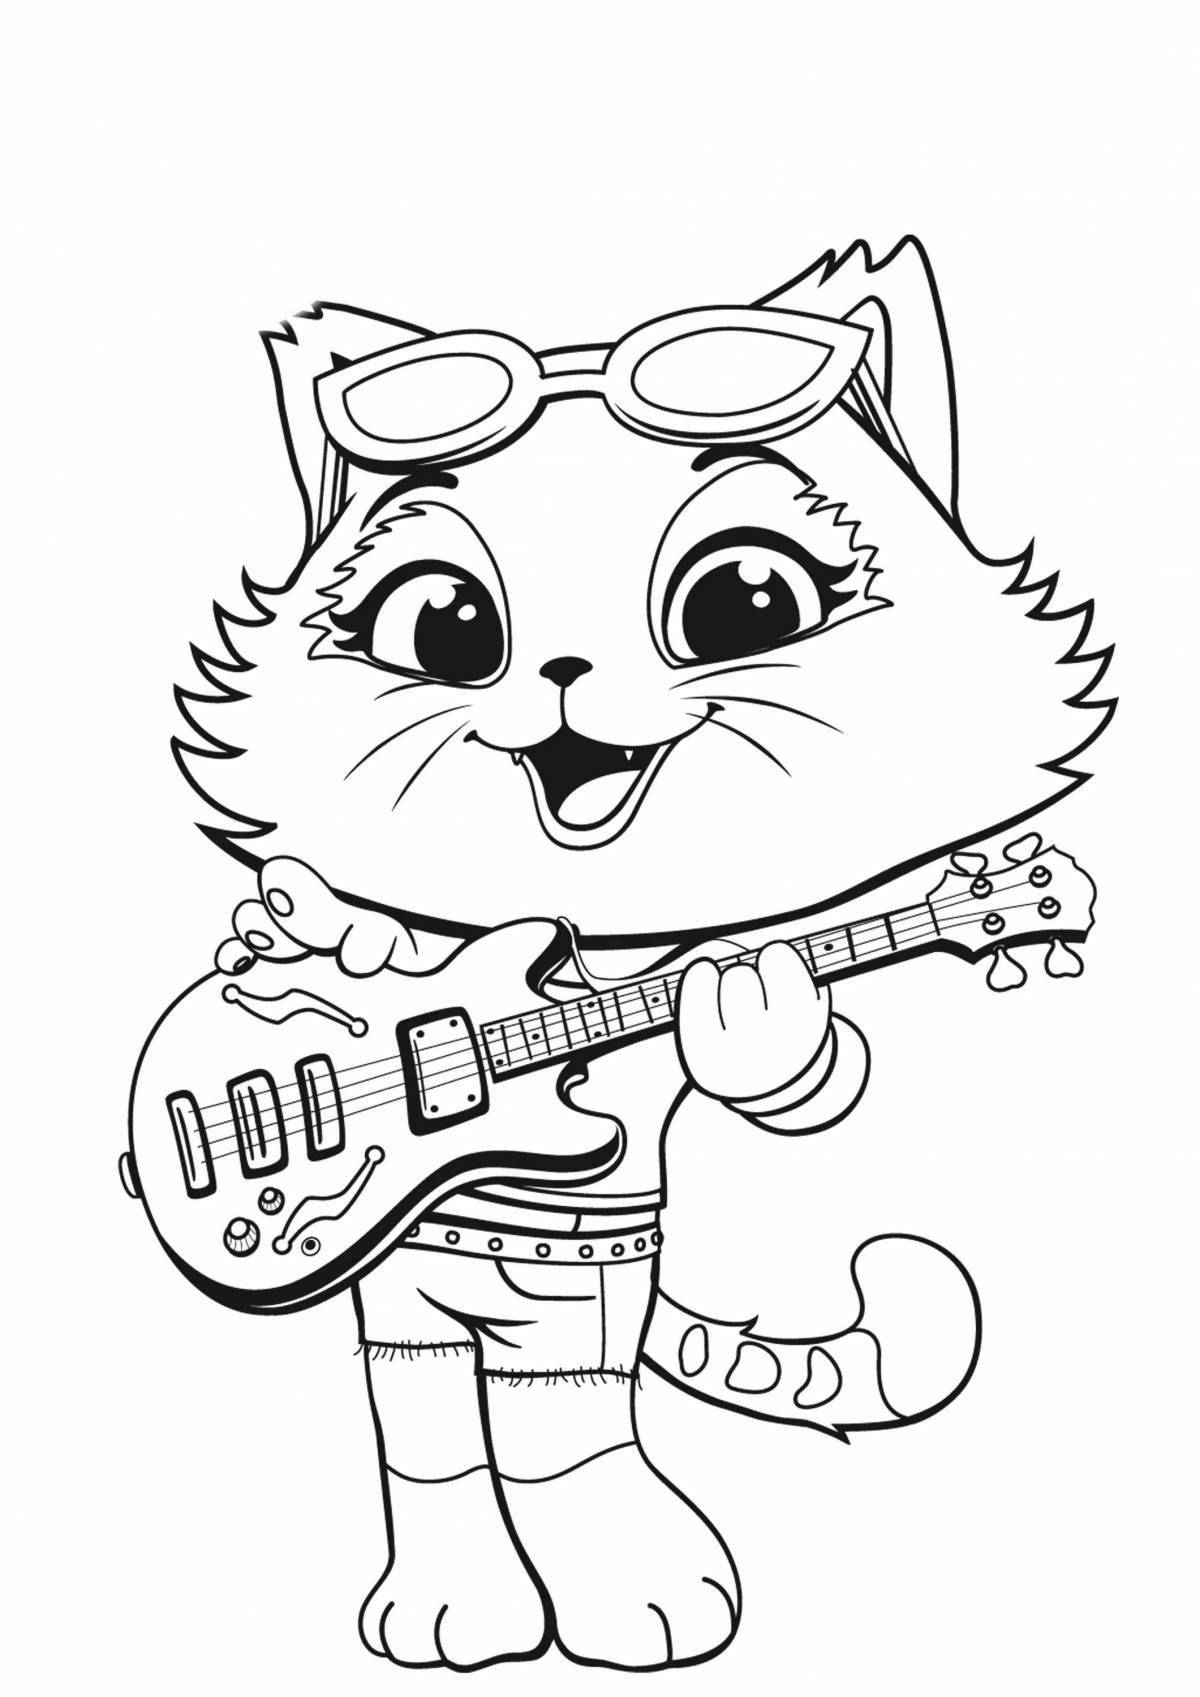 Fancy cat coloring page